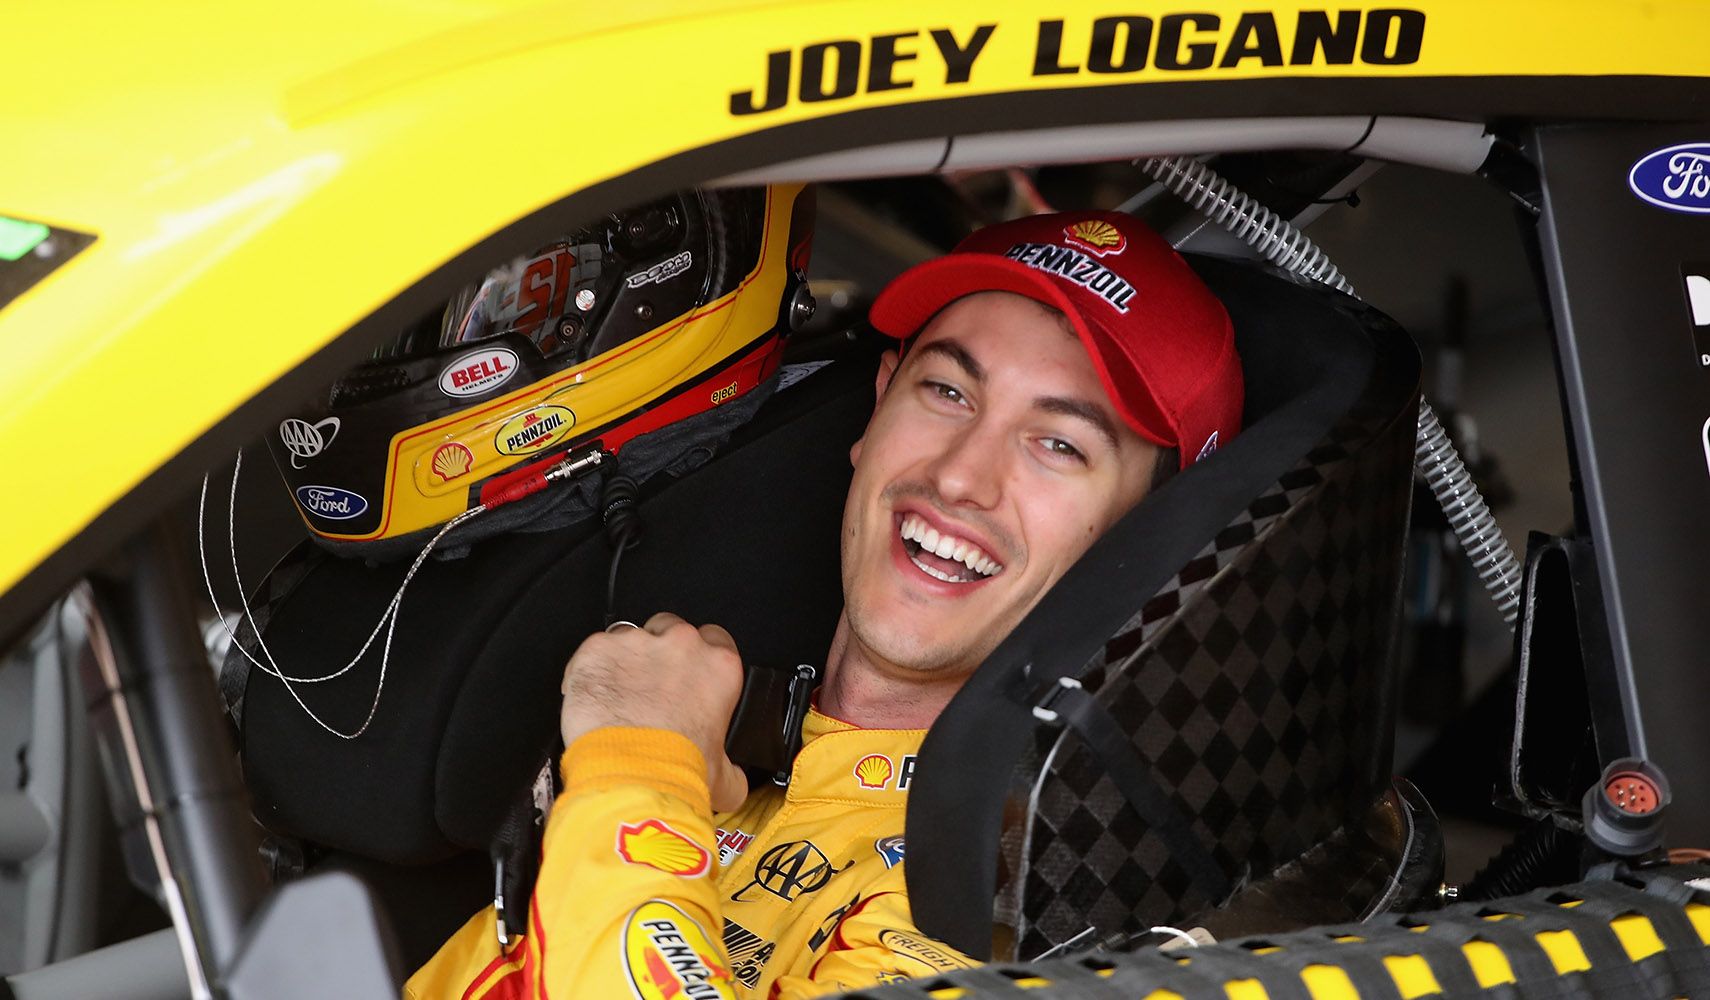 Helping Brad DeBerti In Achieving NASCAR Dreams Is NASCAR Driver And 22-Time Winner Joey Logano